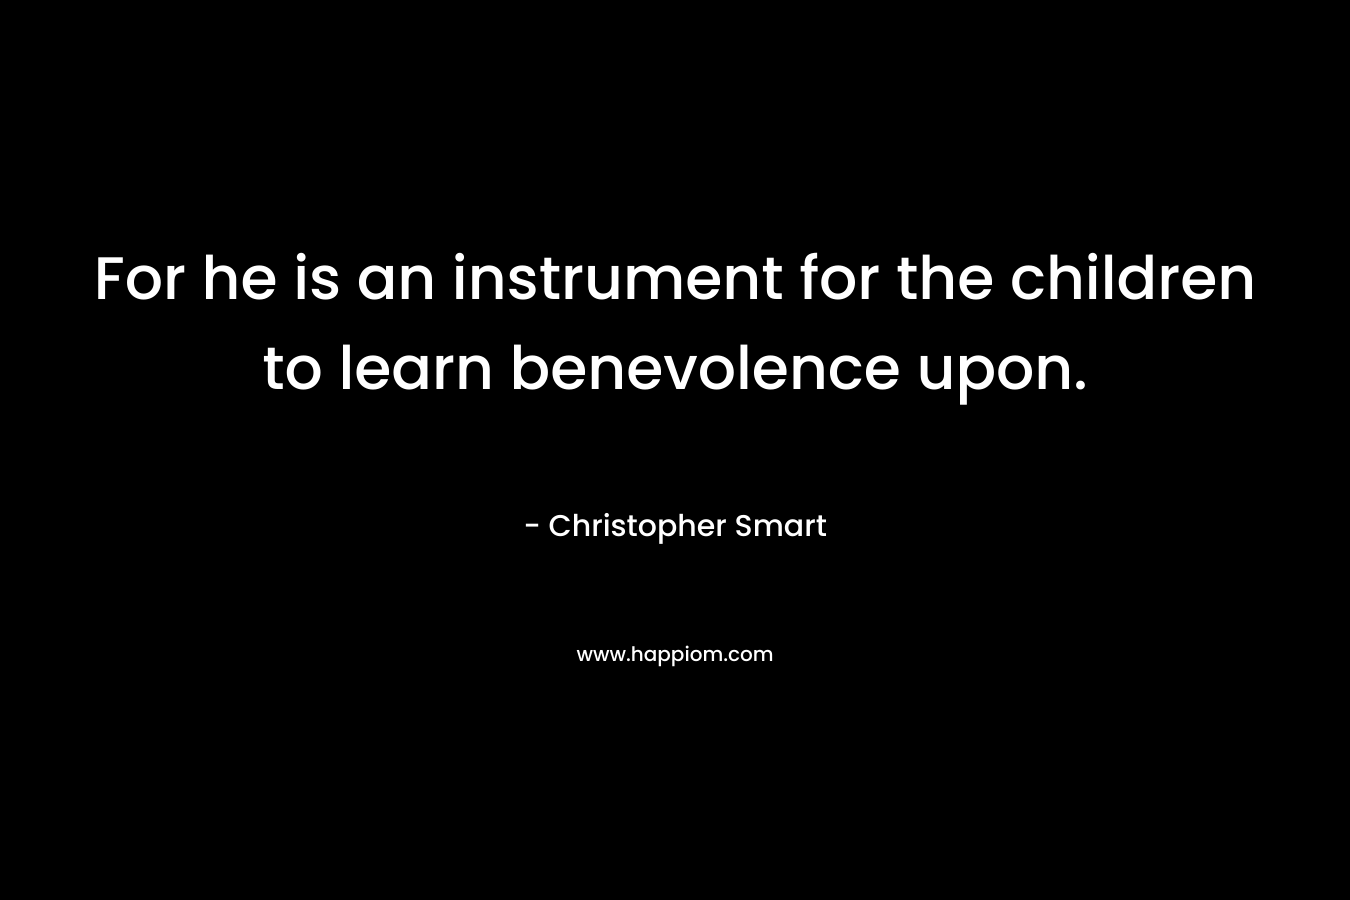 For he is an instrument for the children to learn benevolence upon.